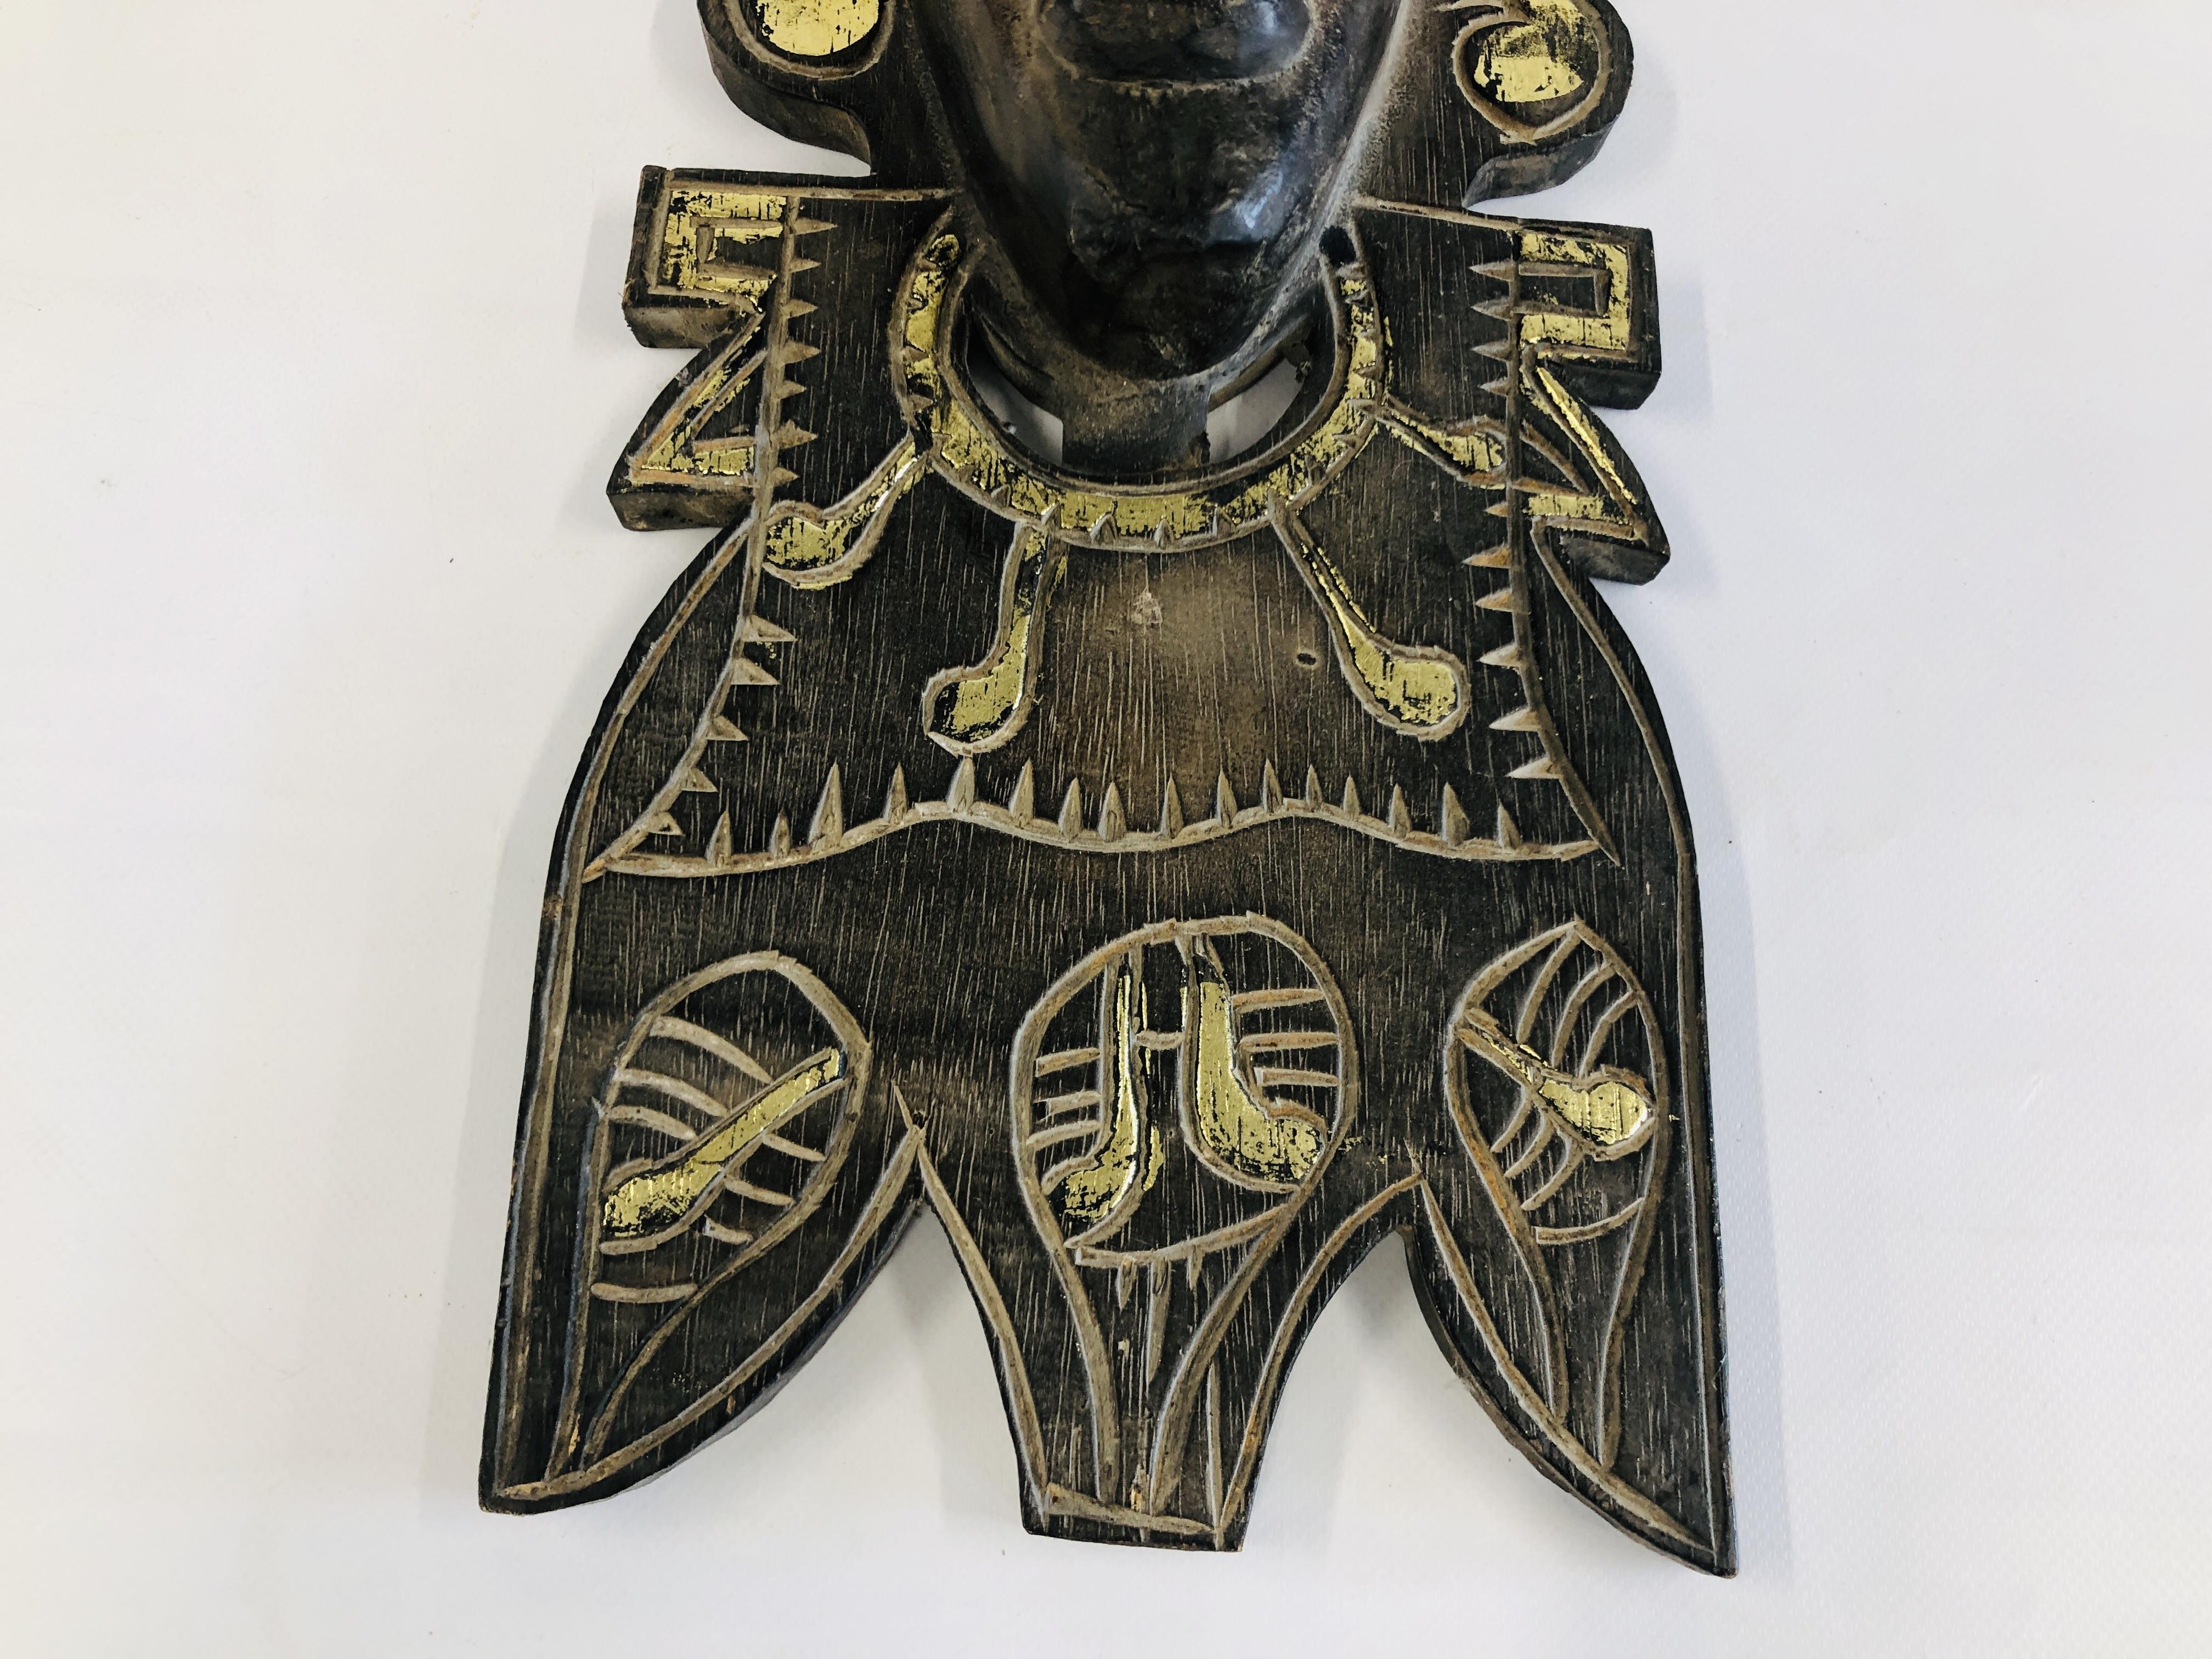 A WOODEN ETHNIC WALL HANGING MASK. H 59CM. - Image 2 of 3